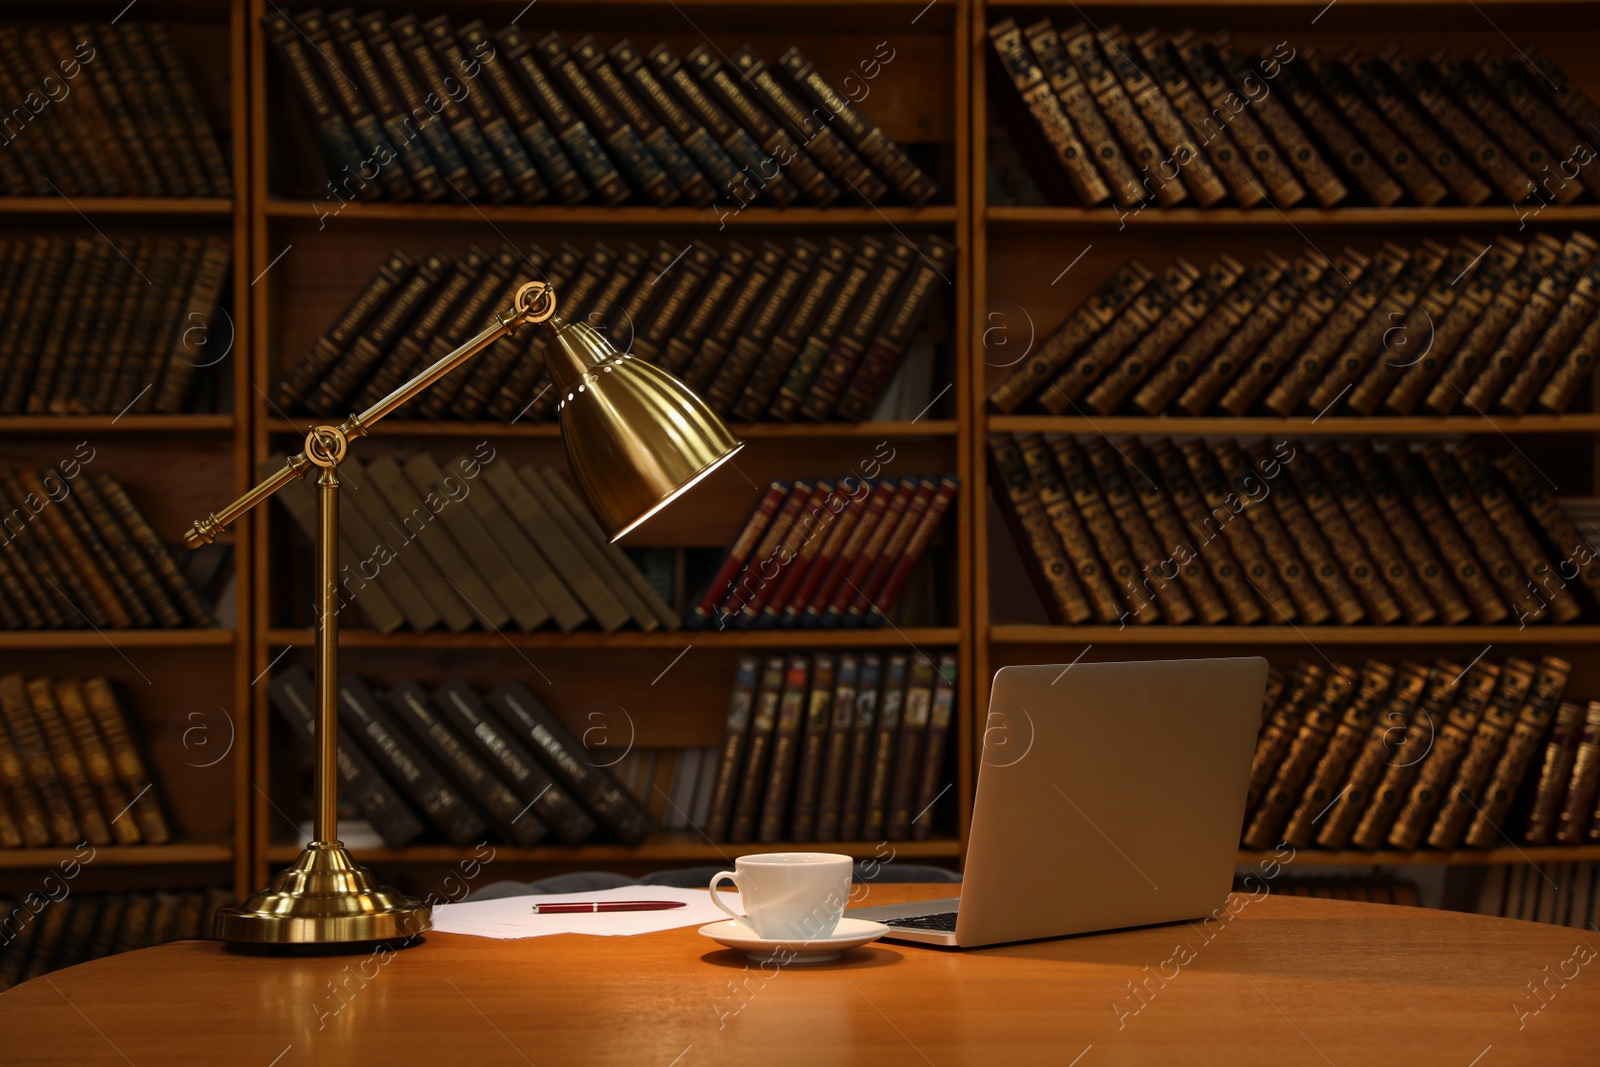 Photo of Lamp, cup of drink and laptop on wooden table near shelves with collection of vintage books in library